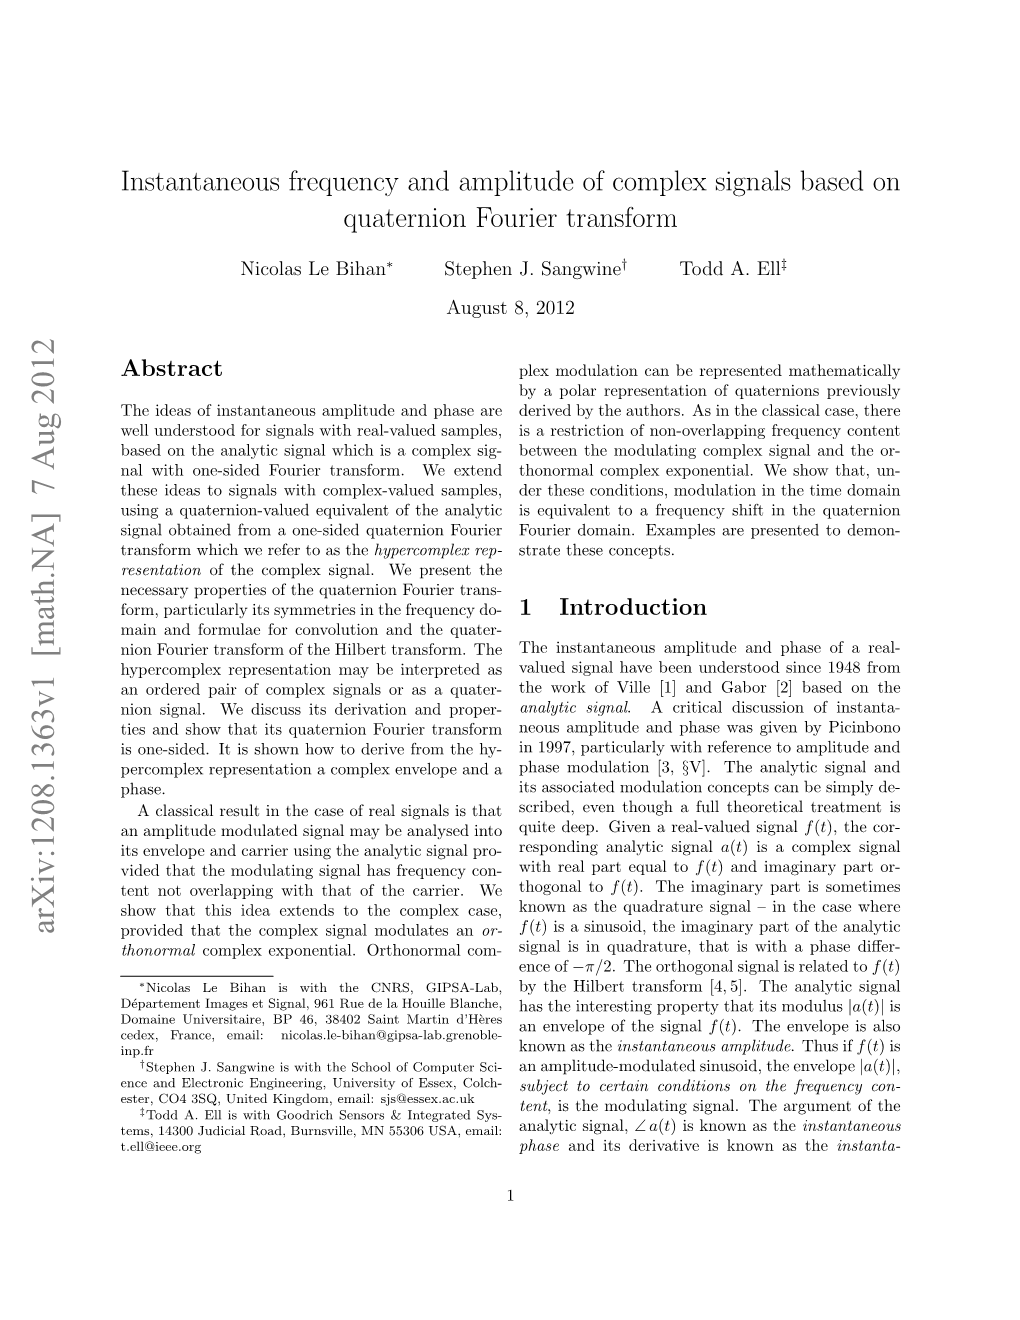 Instantaneous Frequency and Amplitude of Complex Signals Based on Quaternion Fourier Transform